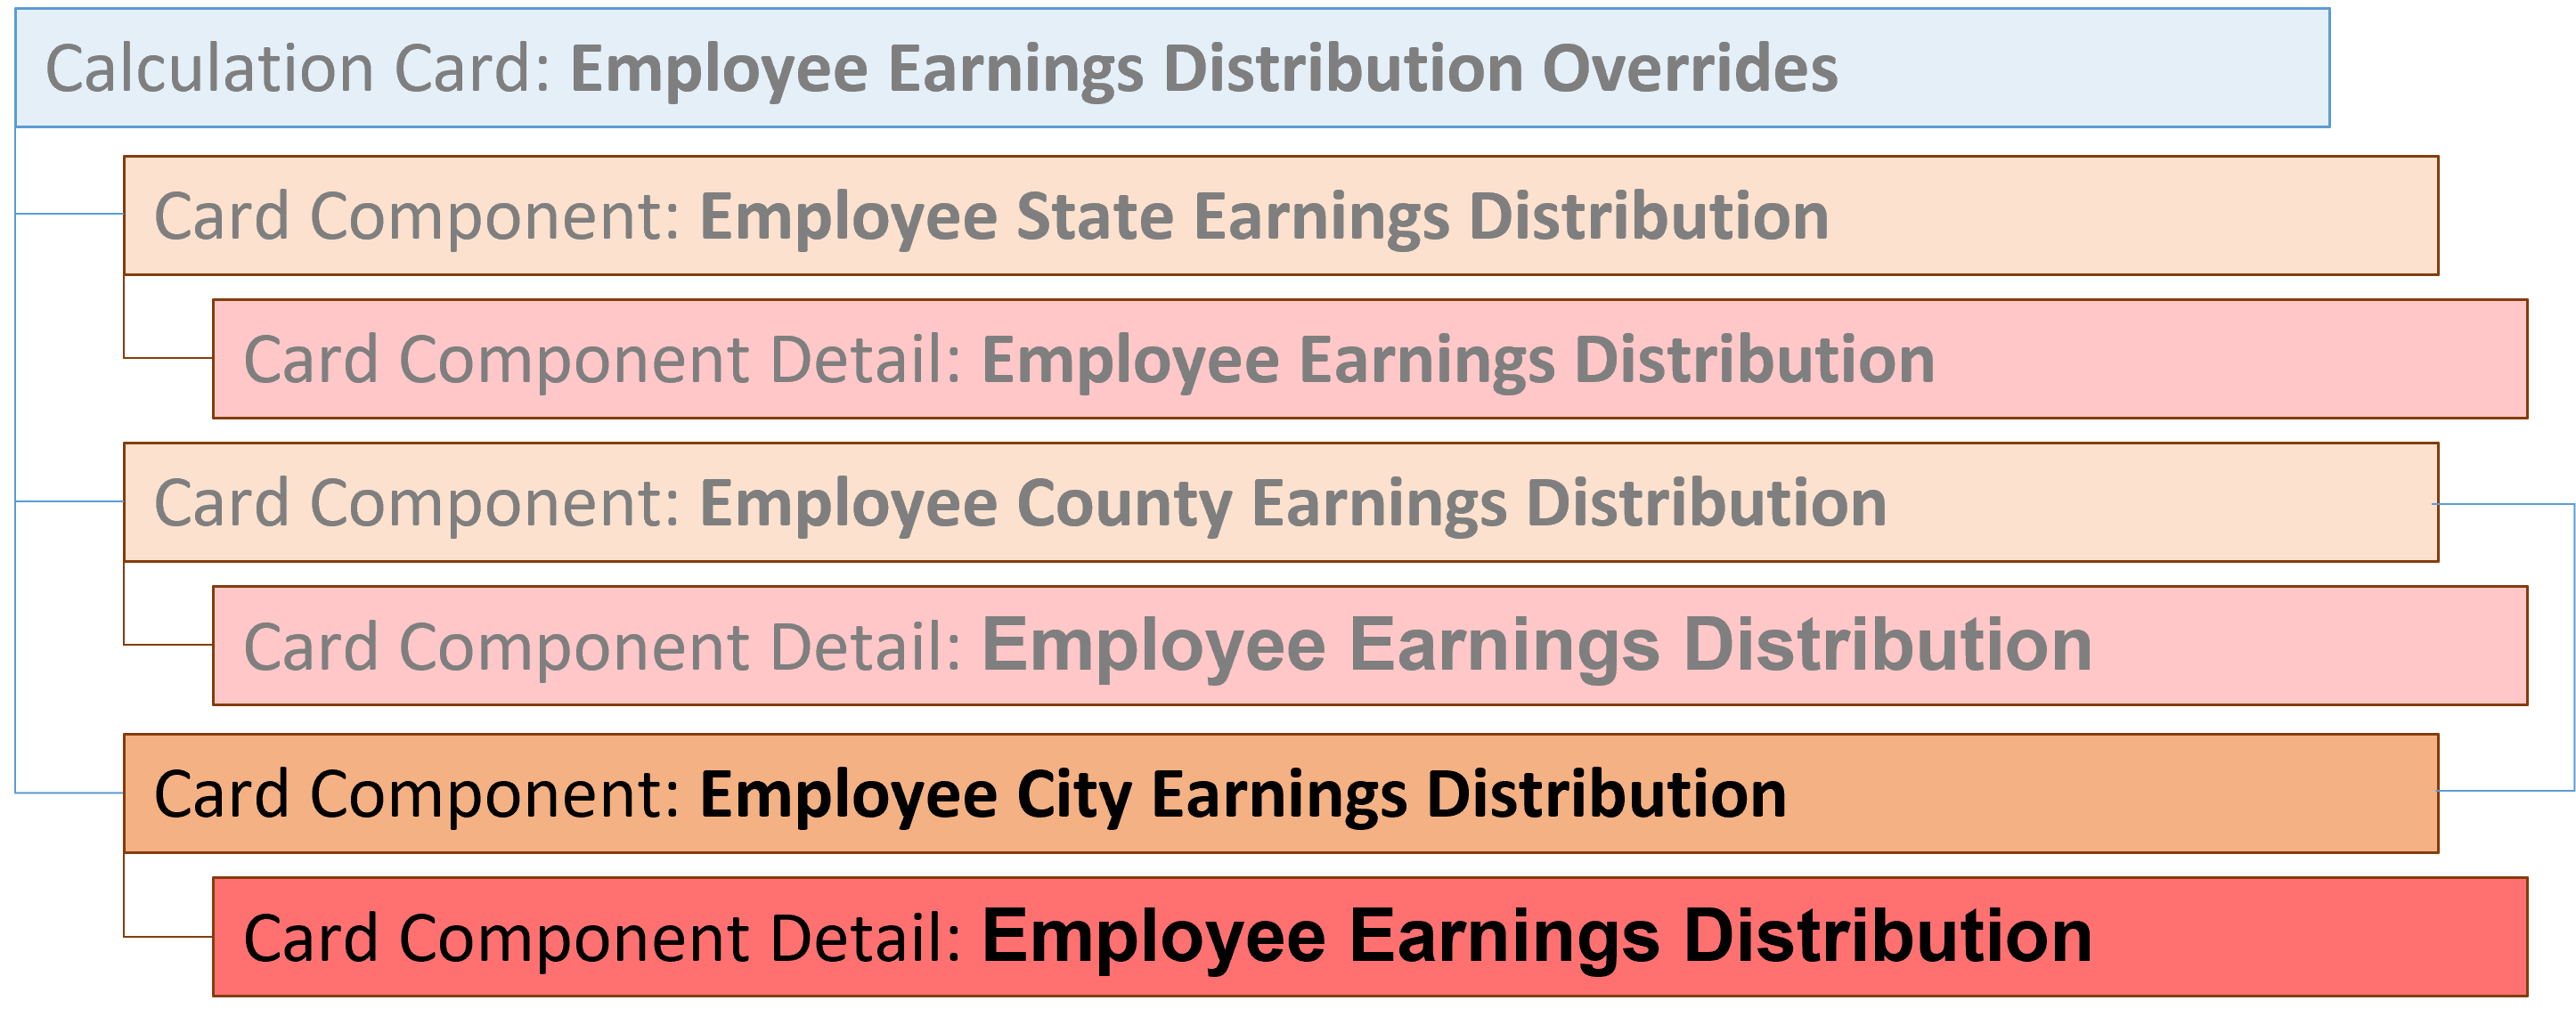 hdl employee city earnings distribution card components hierarchy